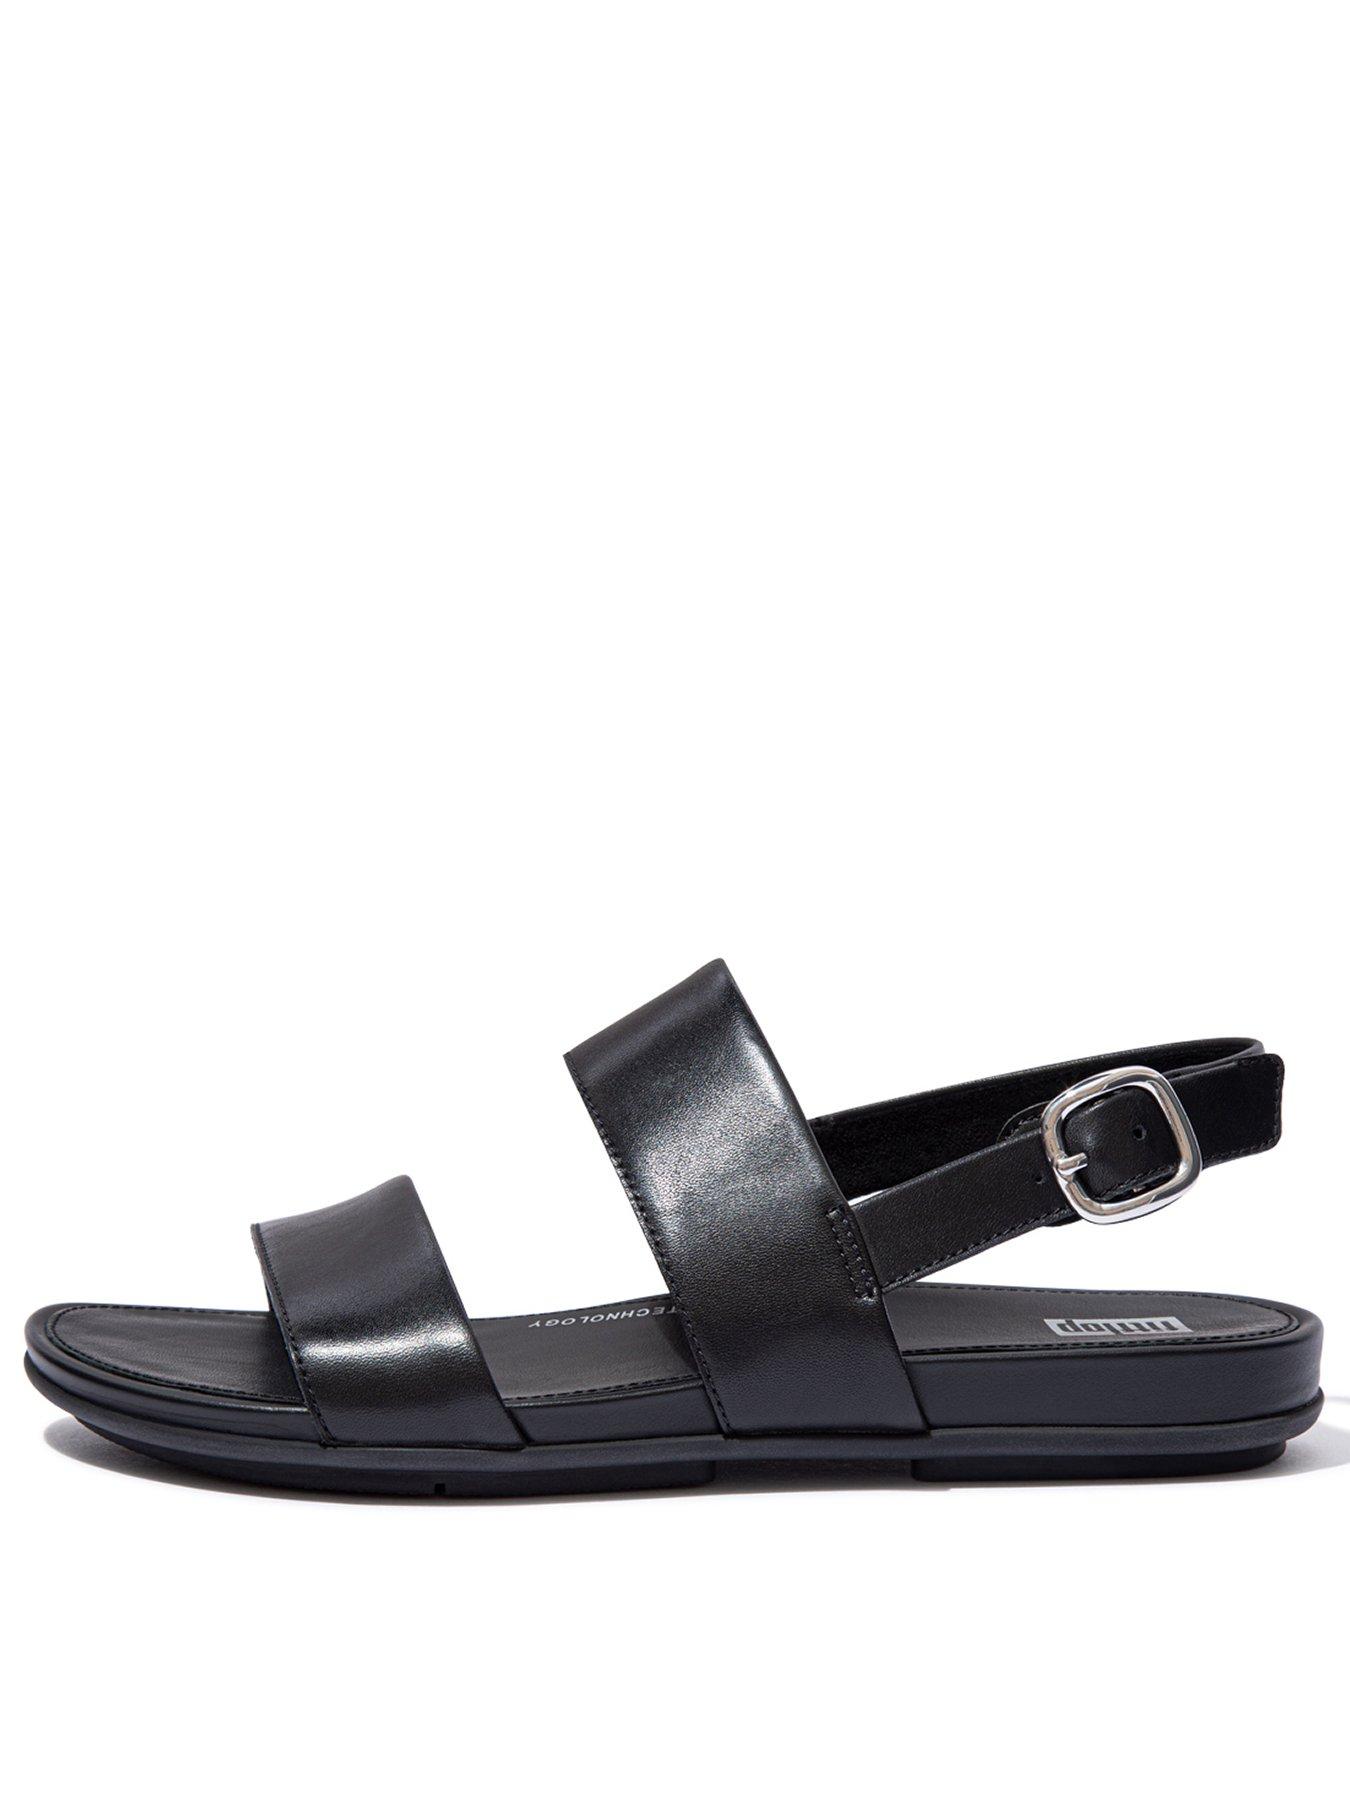 FitFlop Gracie Leather Back-strap Sandals - All Black | very.co.uk